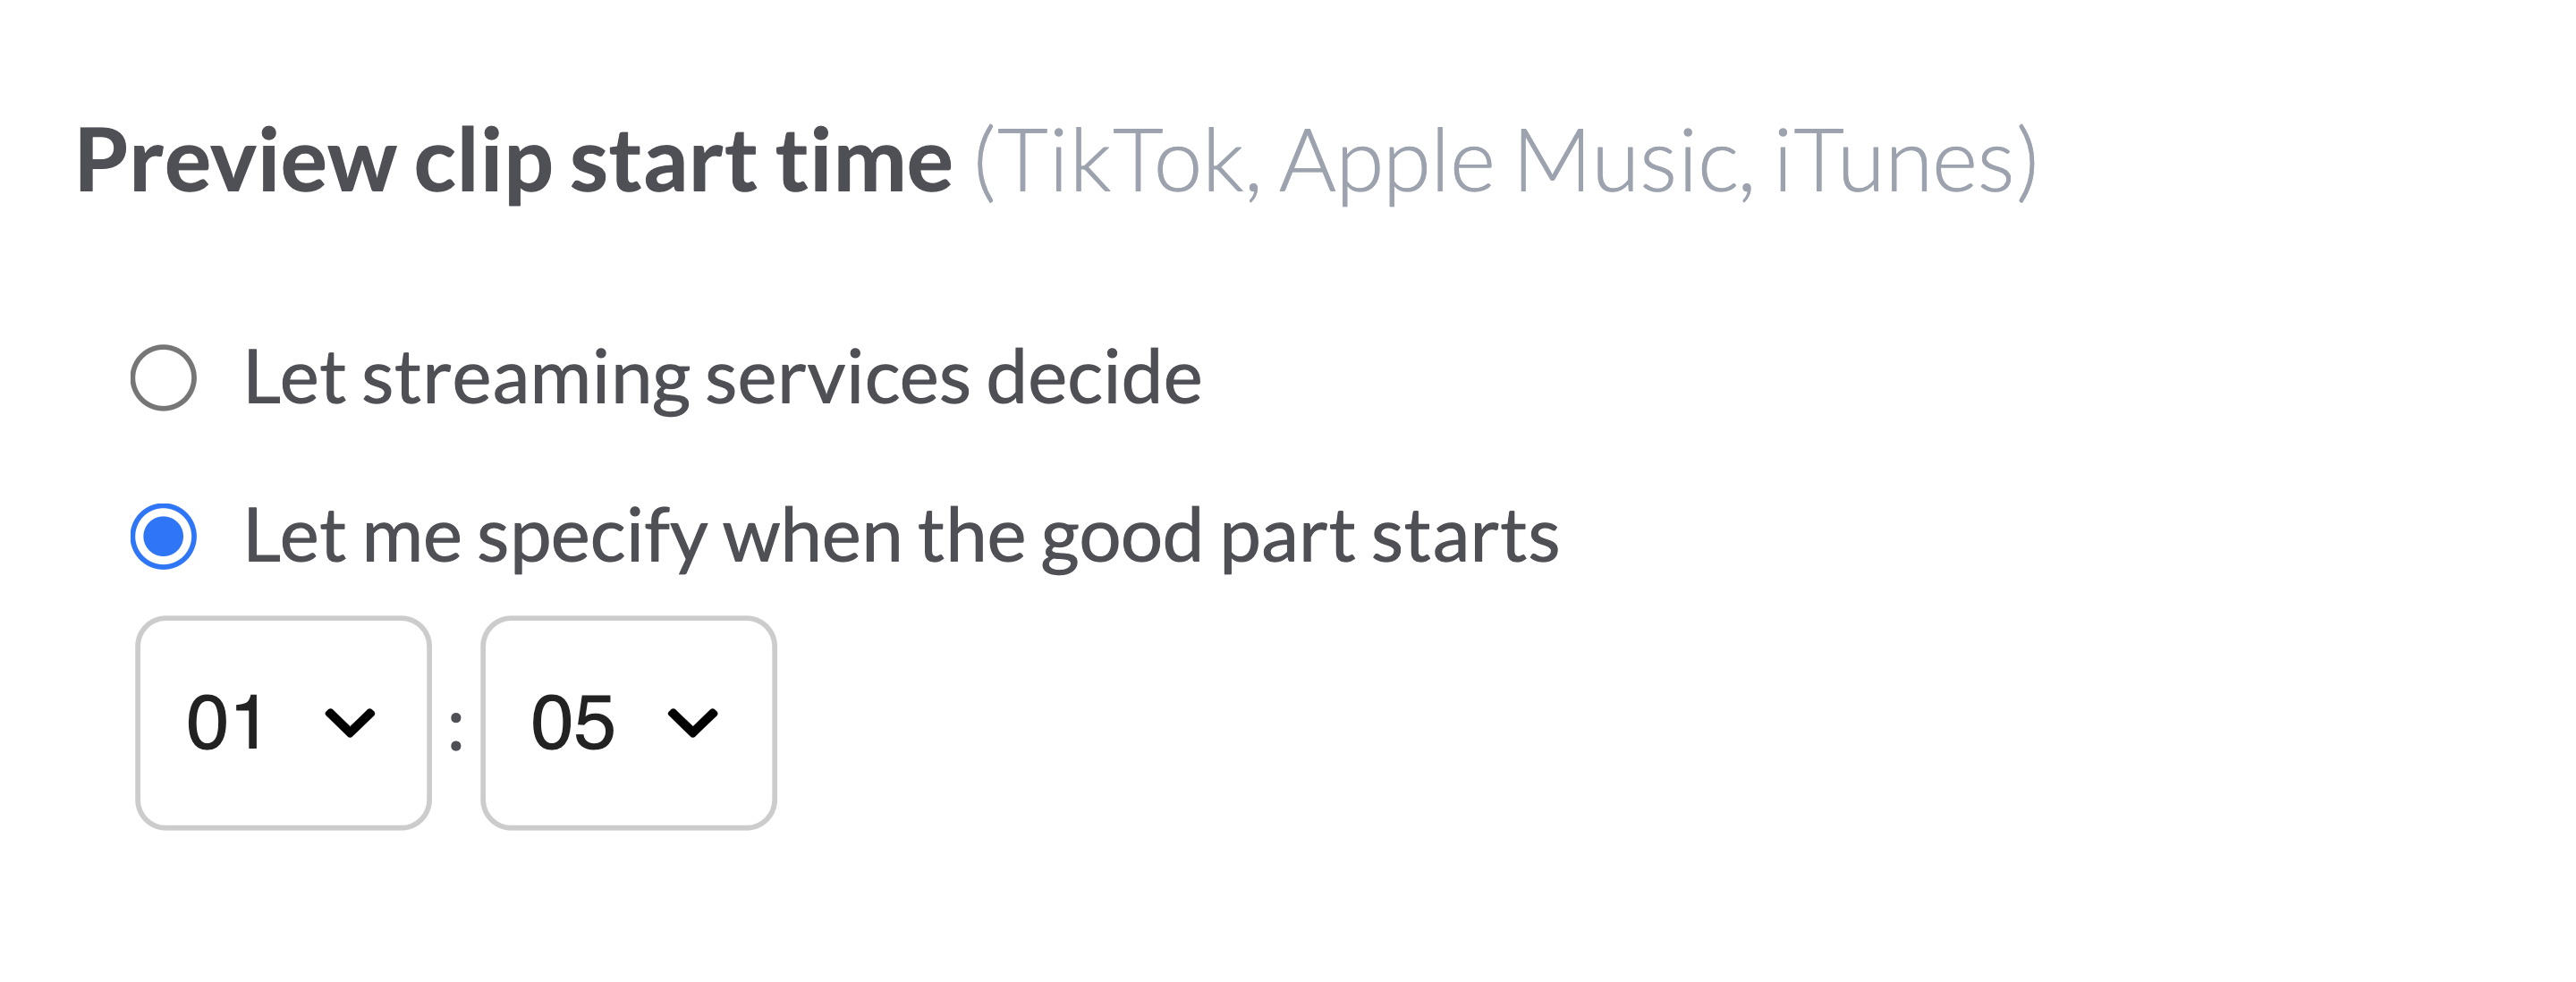 Choose the option “Let me specify when the good part starts” to specify a start time for audio previews in streaming services.